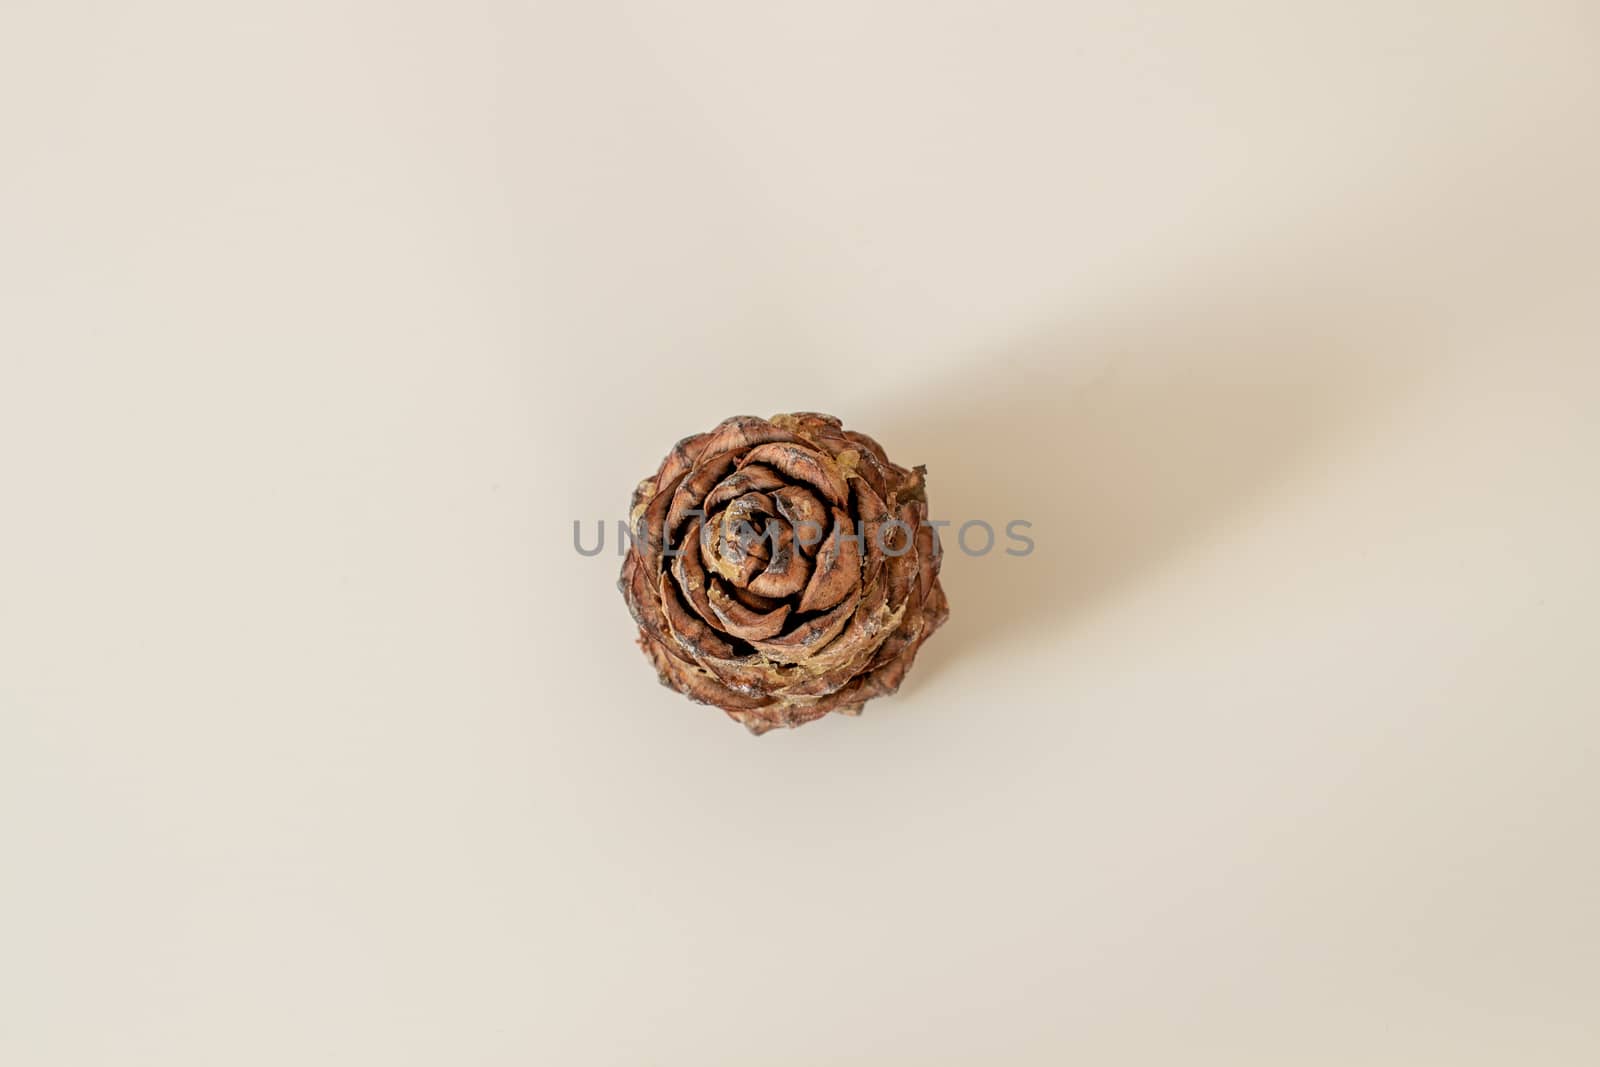 Pine cone with nuts on a white background. High quality photo